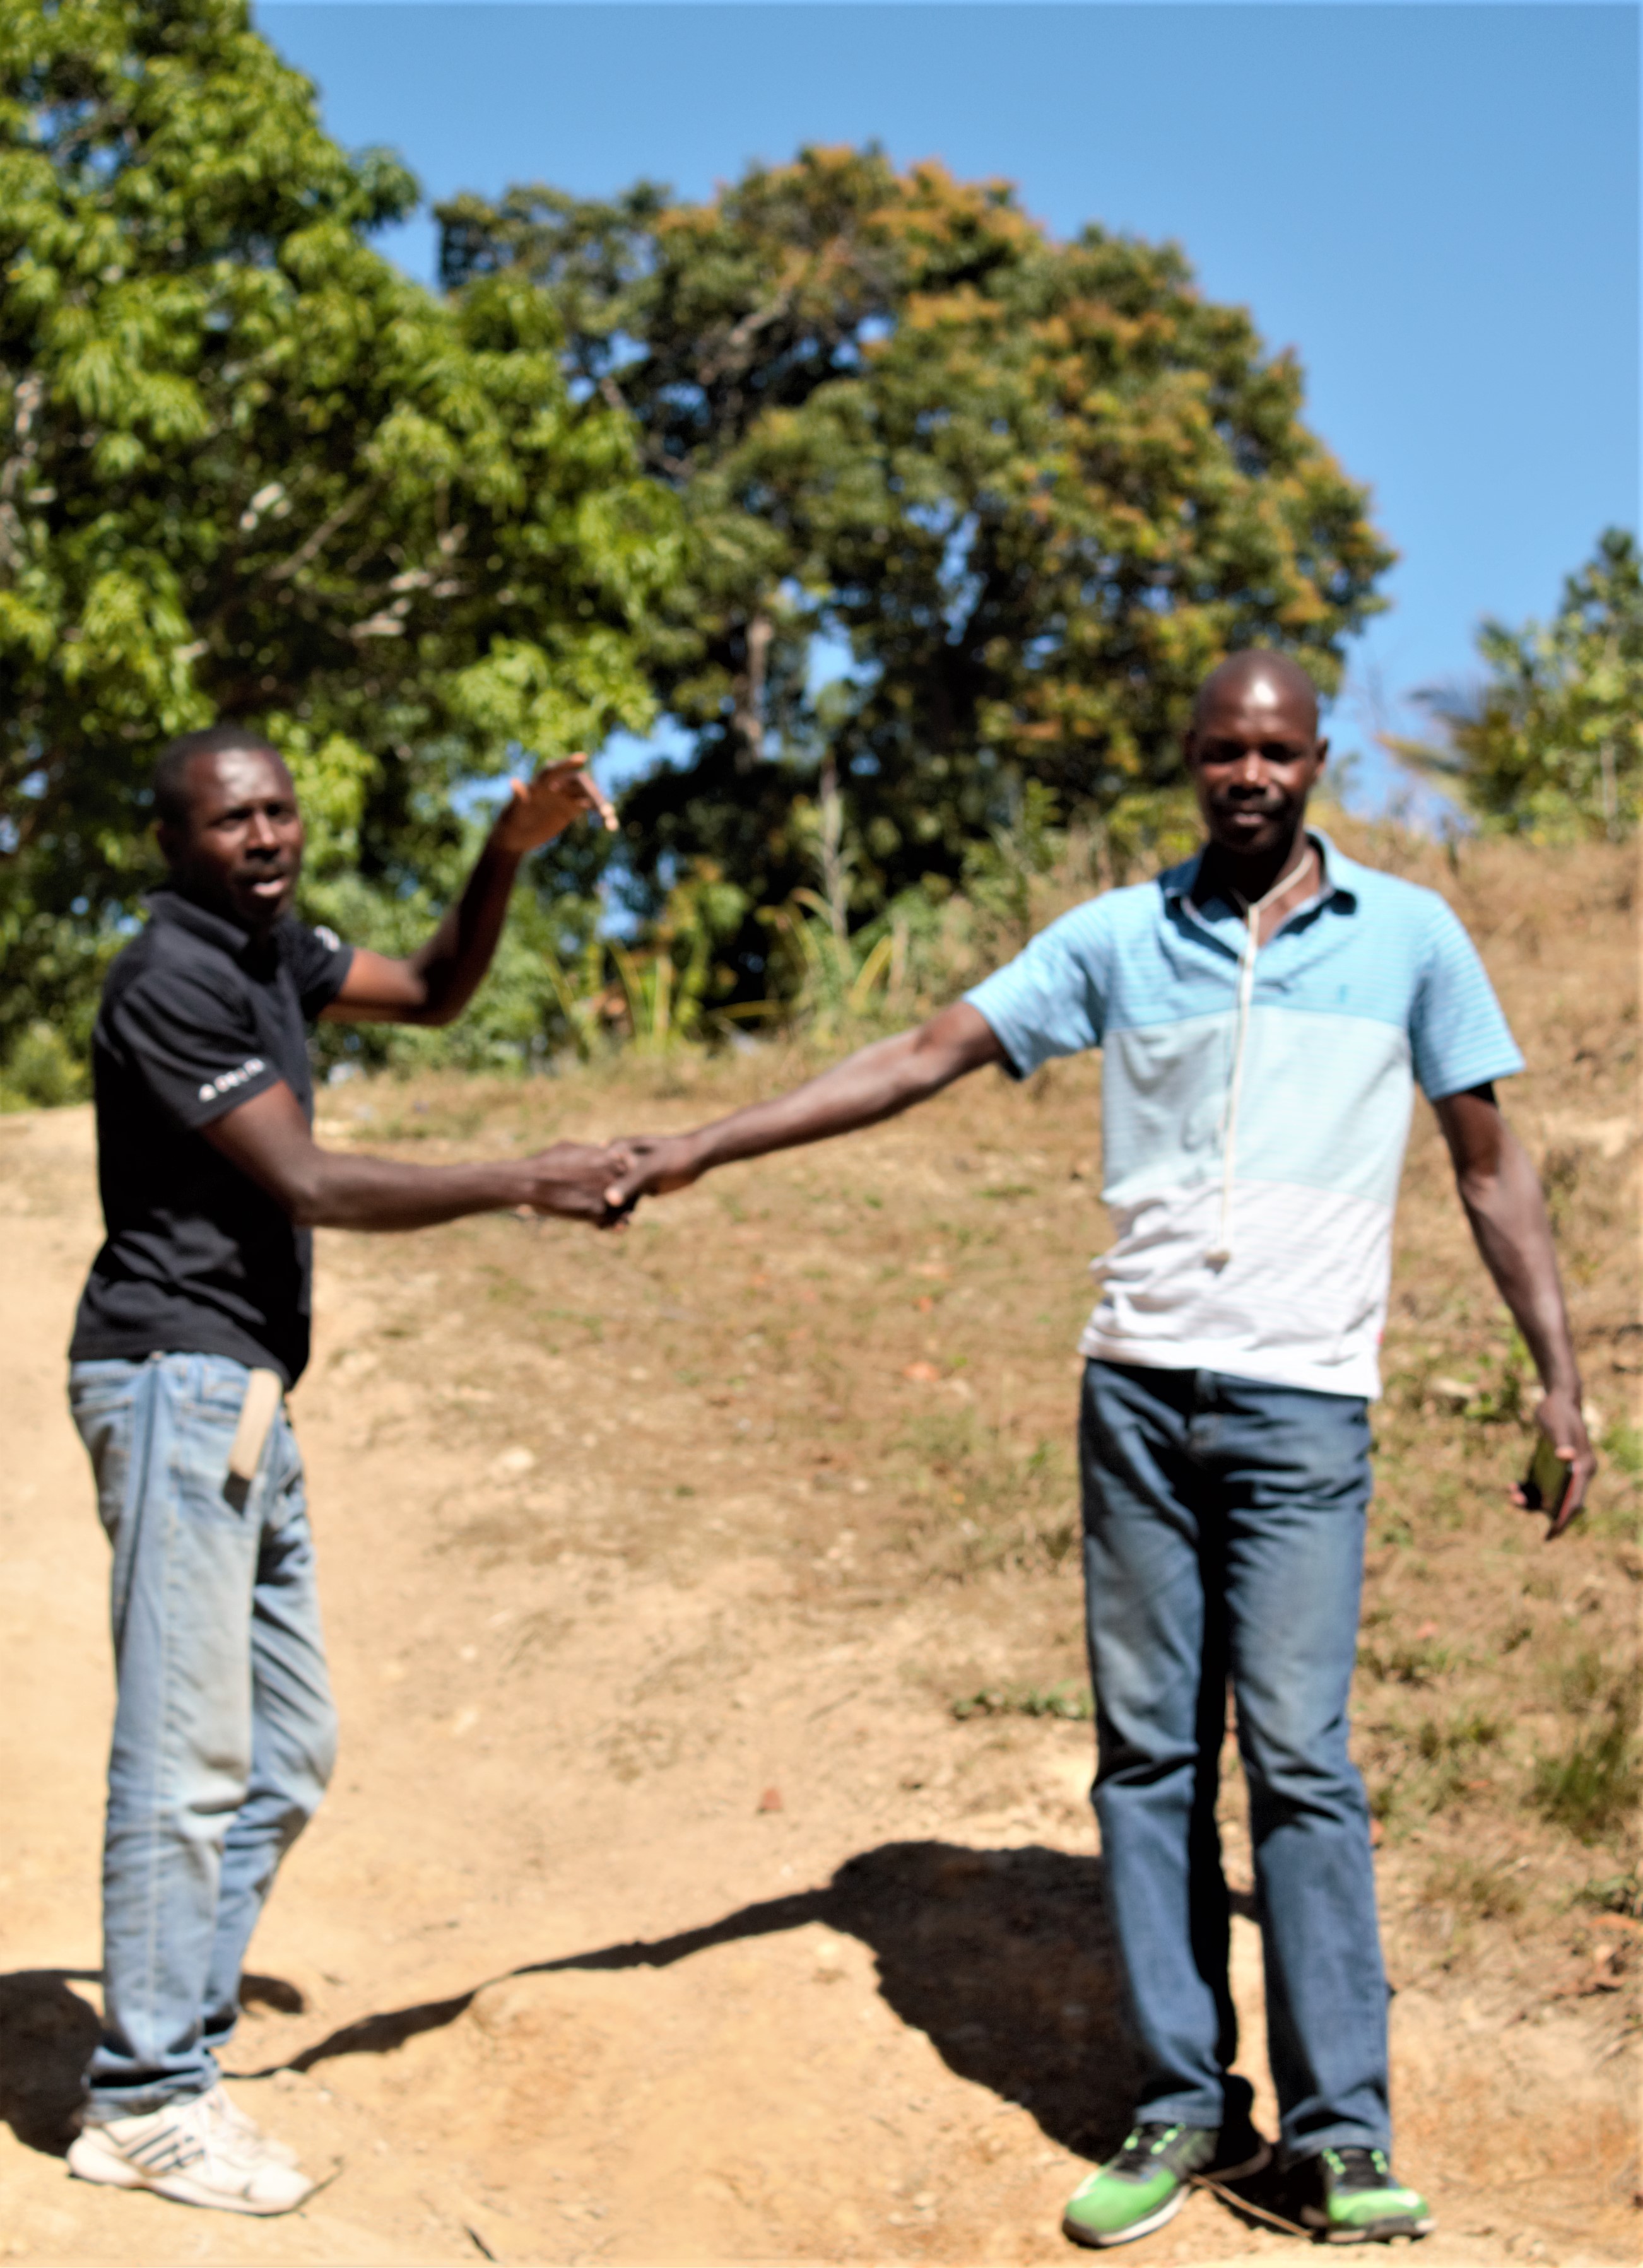 Herve (left), from Papaye, and Eric (right), traveling together on a trip to Mombin Crochu. This is the path to the community of Mapou, which Keila and Annika ran up during our time there in August 2018 (see Jenny’s letter “Adventures in CHE training” on our Mission Connections profile page).